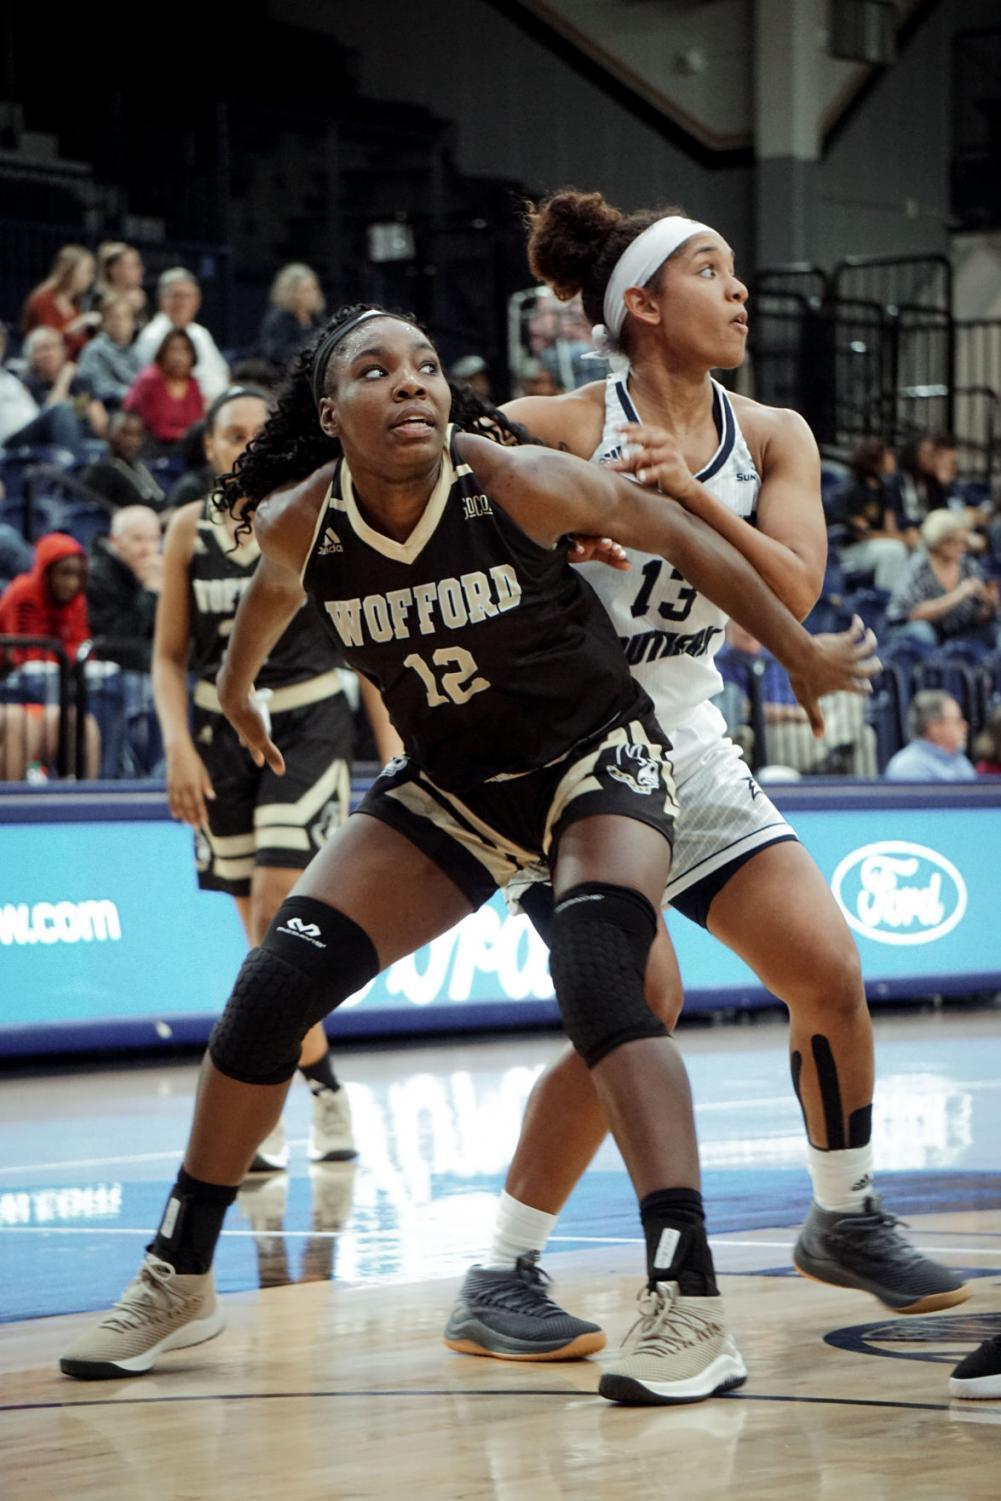 Five+takeaways+from+women%E2%80%99s+basketball%E2%80%99s+81-65+loss+to+Wofford